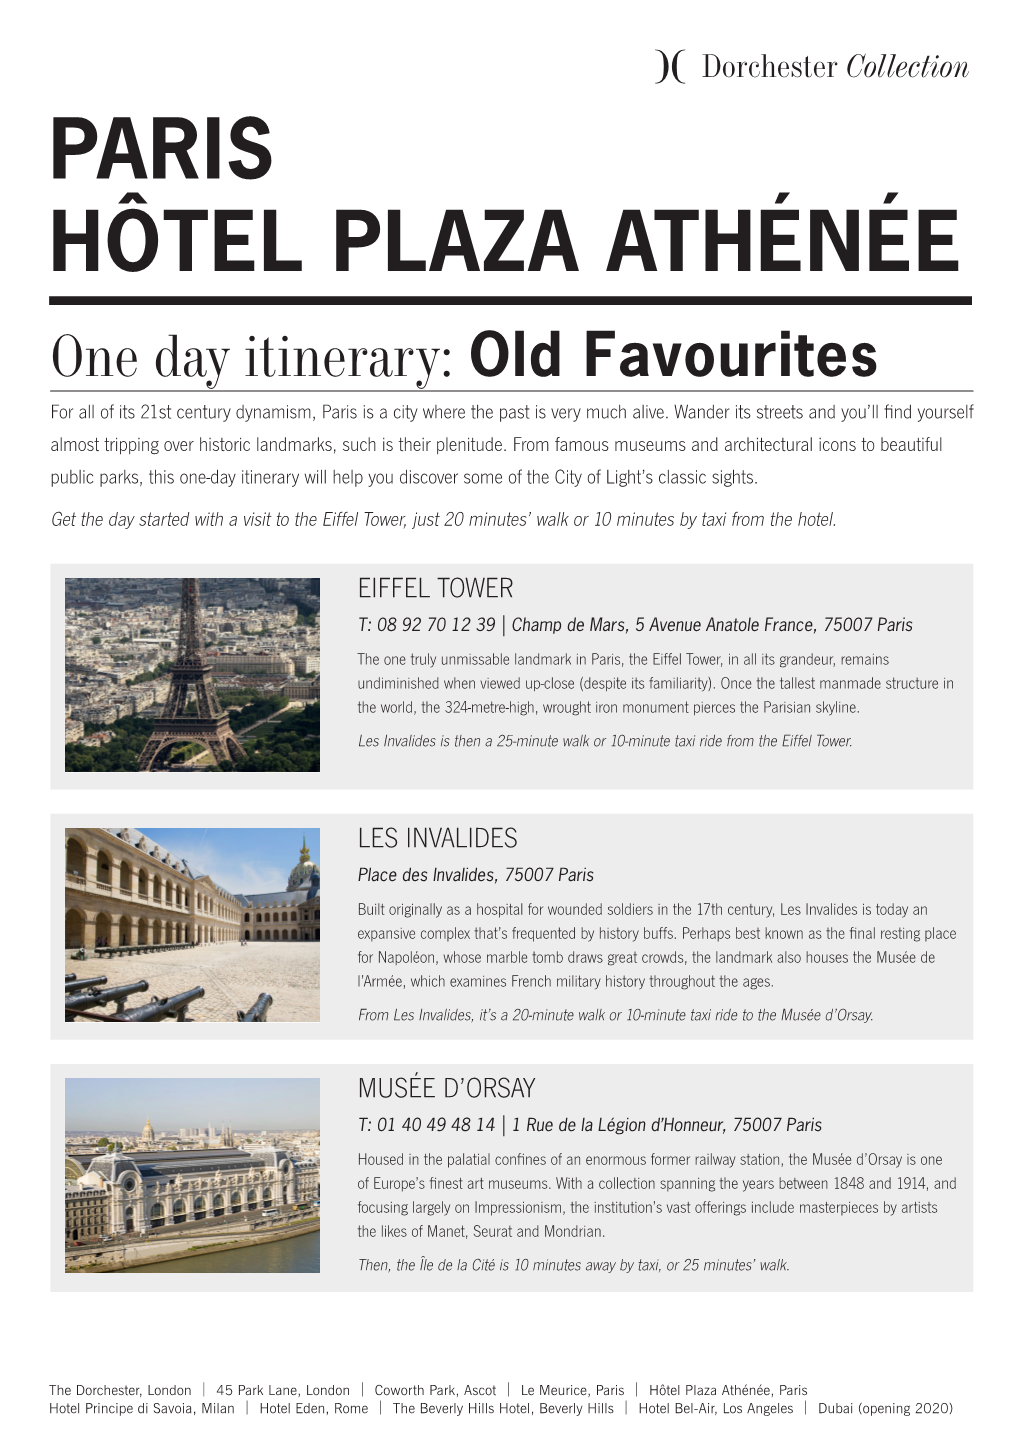 PARIS HÔTEL PLAZA ATHÉNÉE One Day Itinerary: Old Favourites for All of Its 21St Century Dynamism, Paris Is a City Where the Past Is Very Much Alive